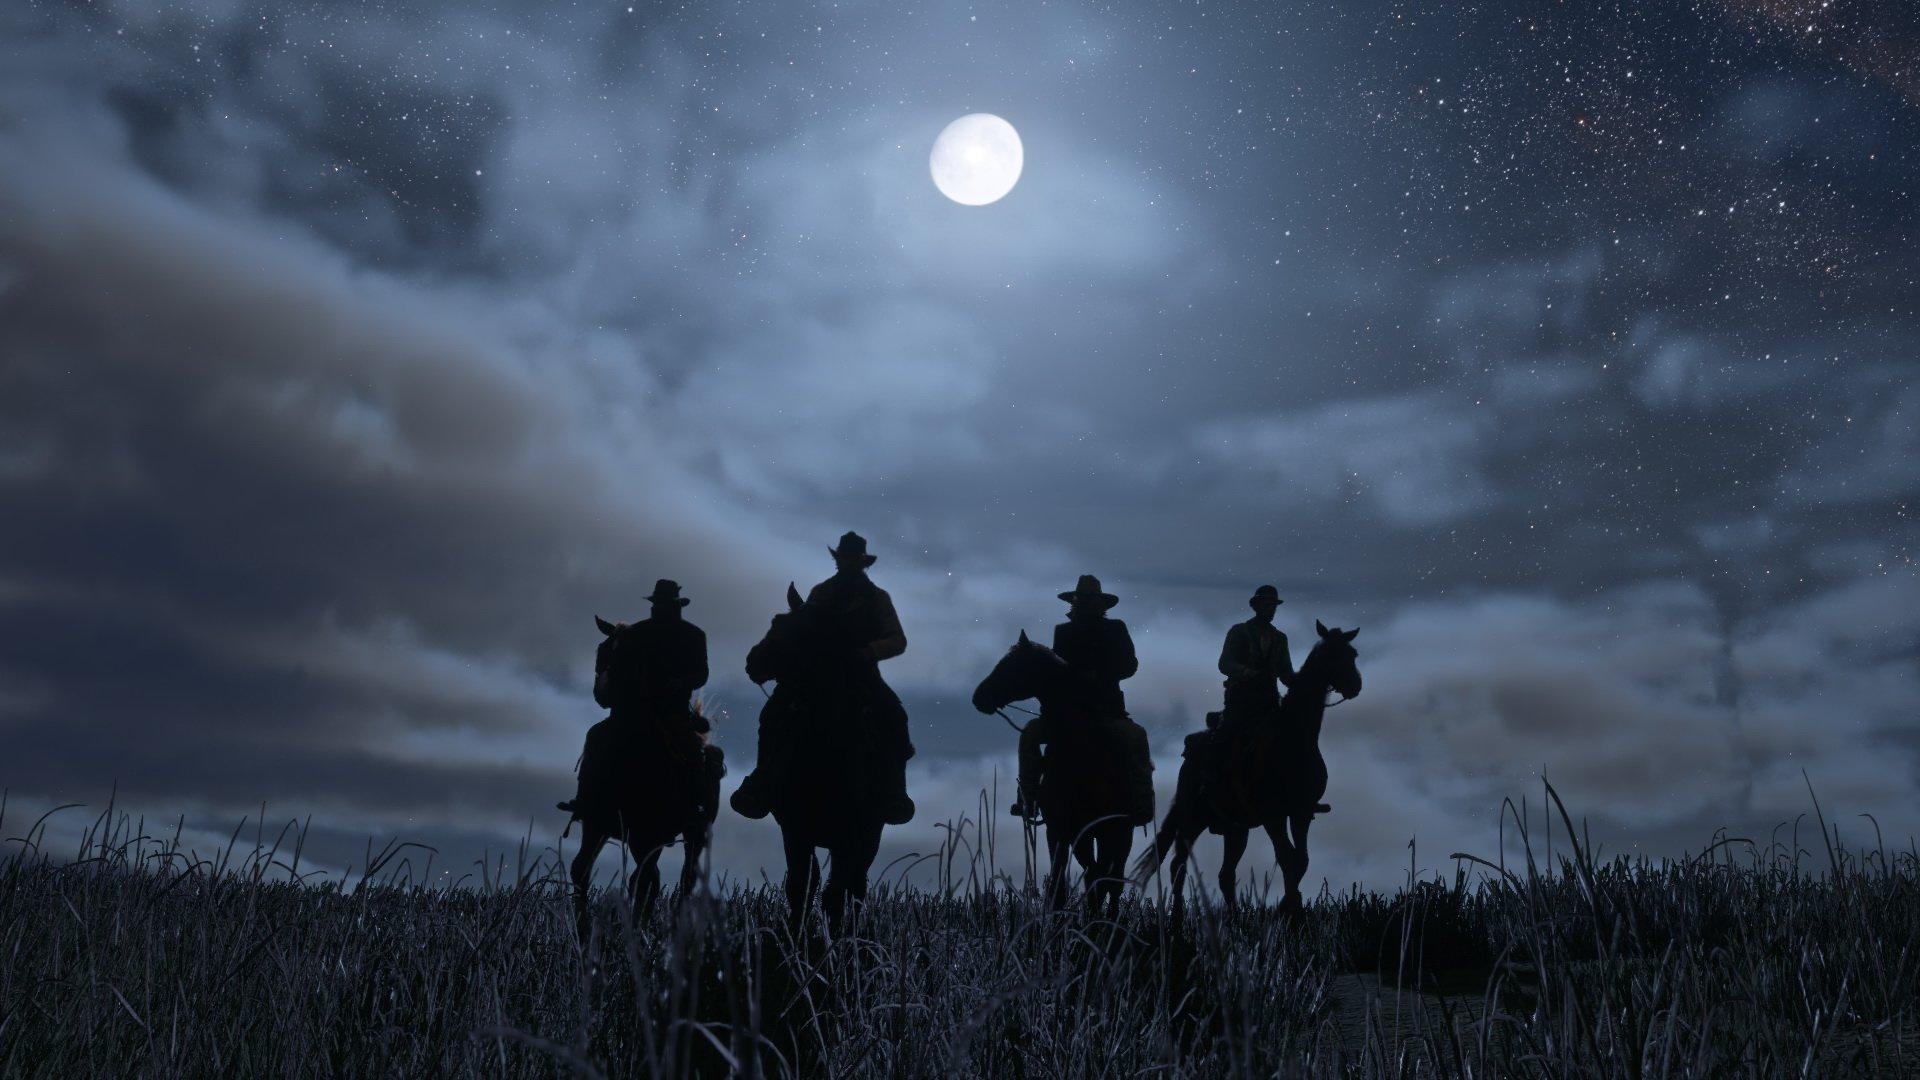 red dead redemption 2 used gamestop